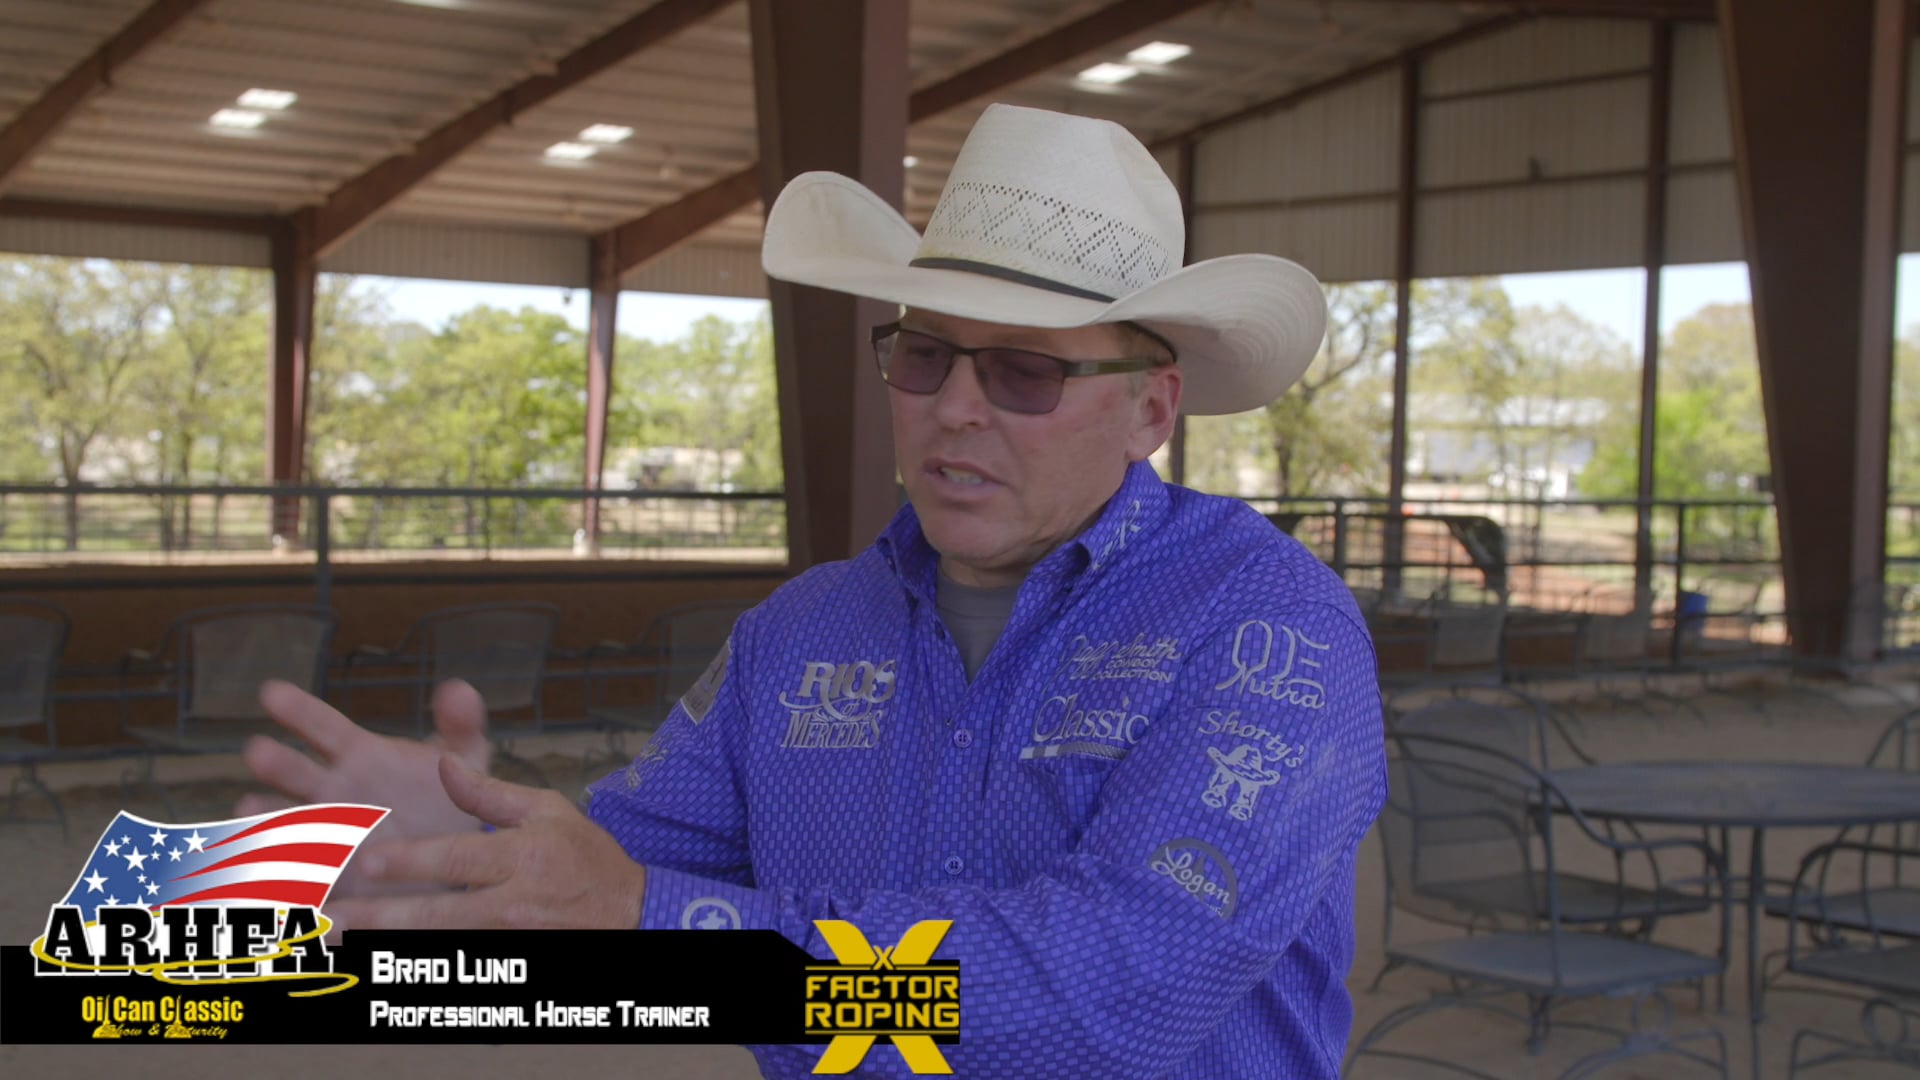 Interview with Professional Horse Trainer Brad Lund FREE